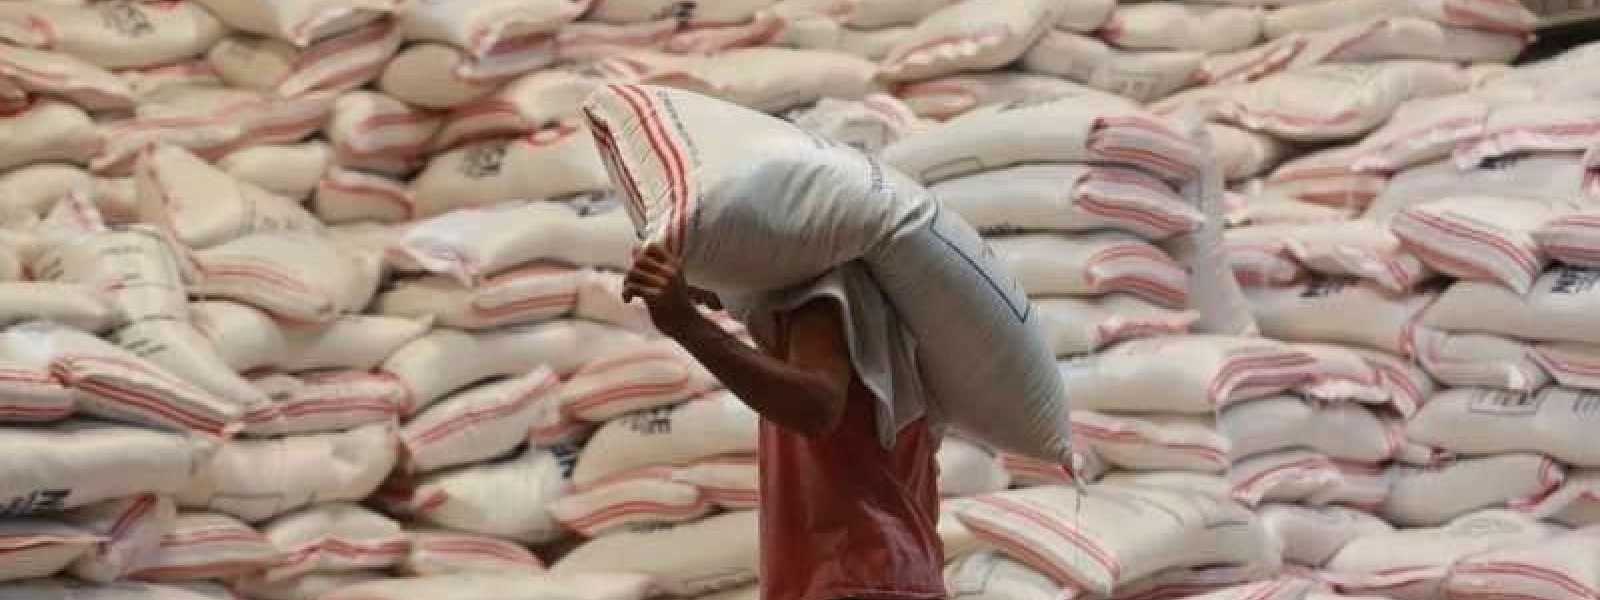 PMB to release 10,000 MT of rice per month